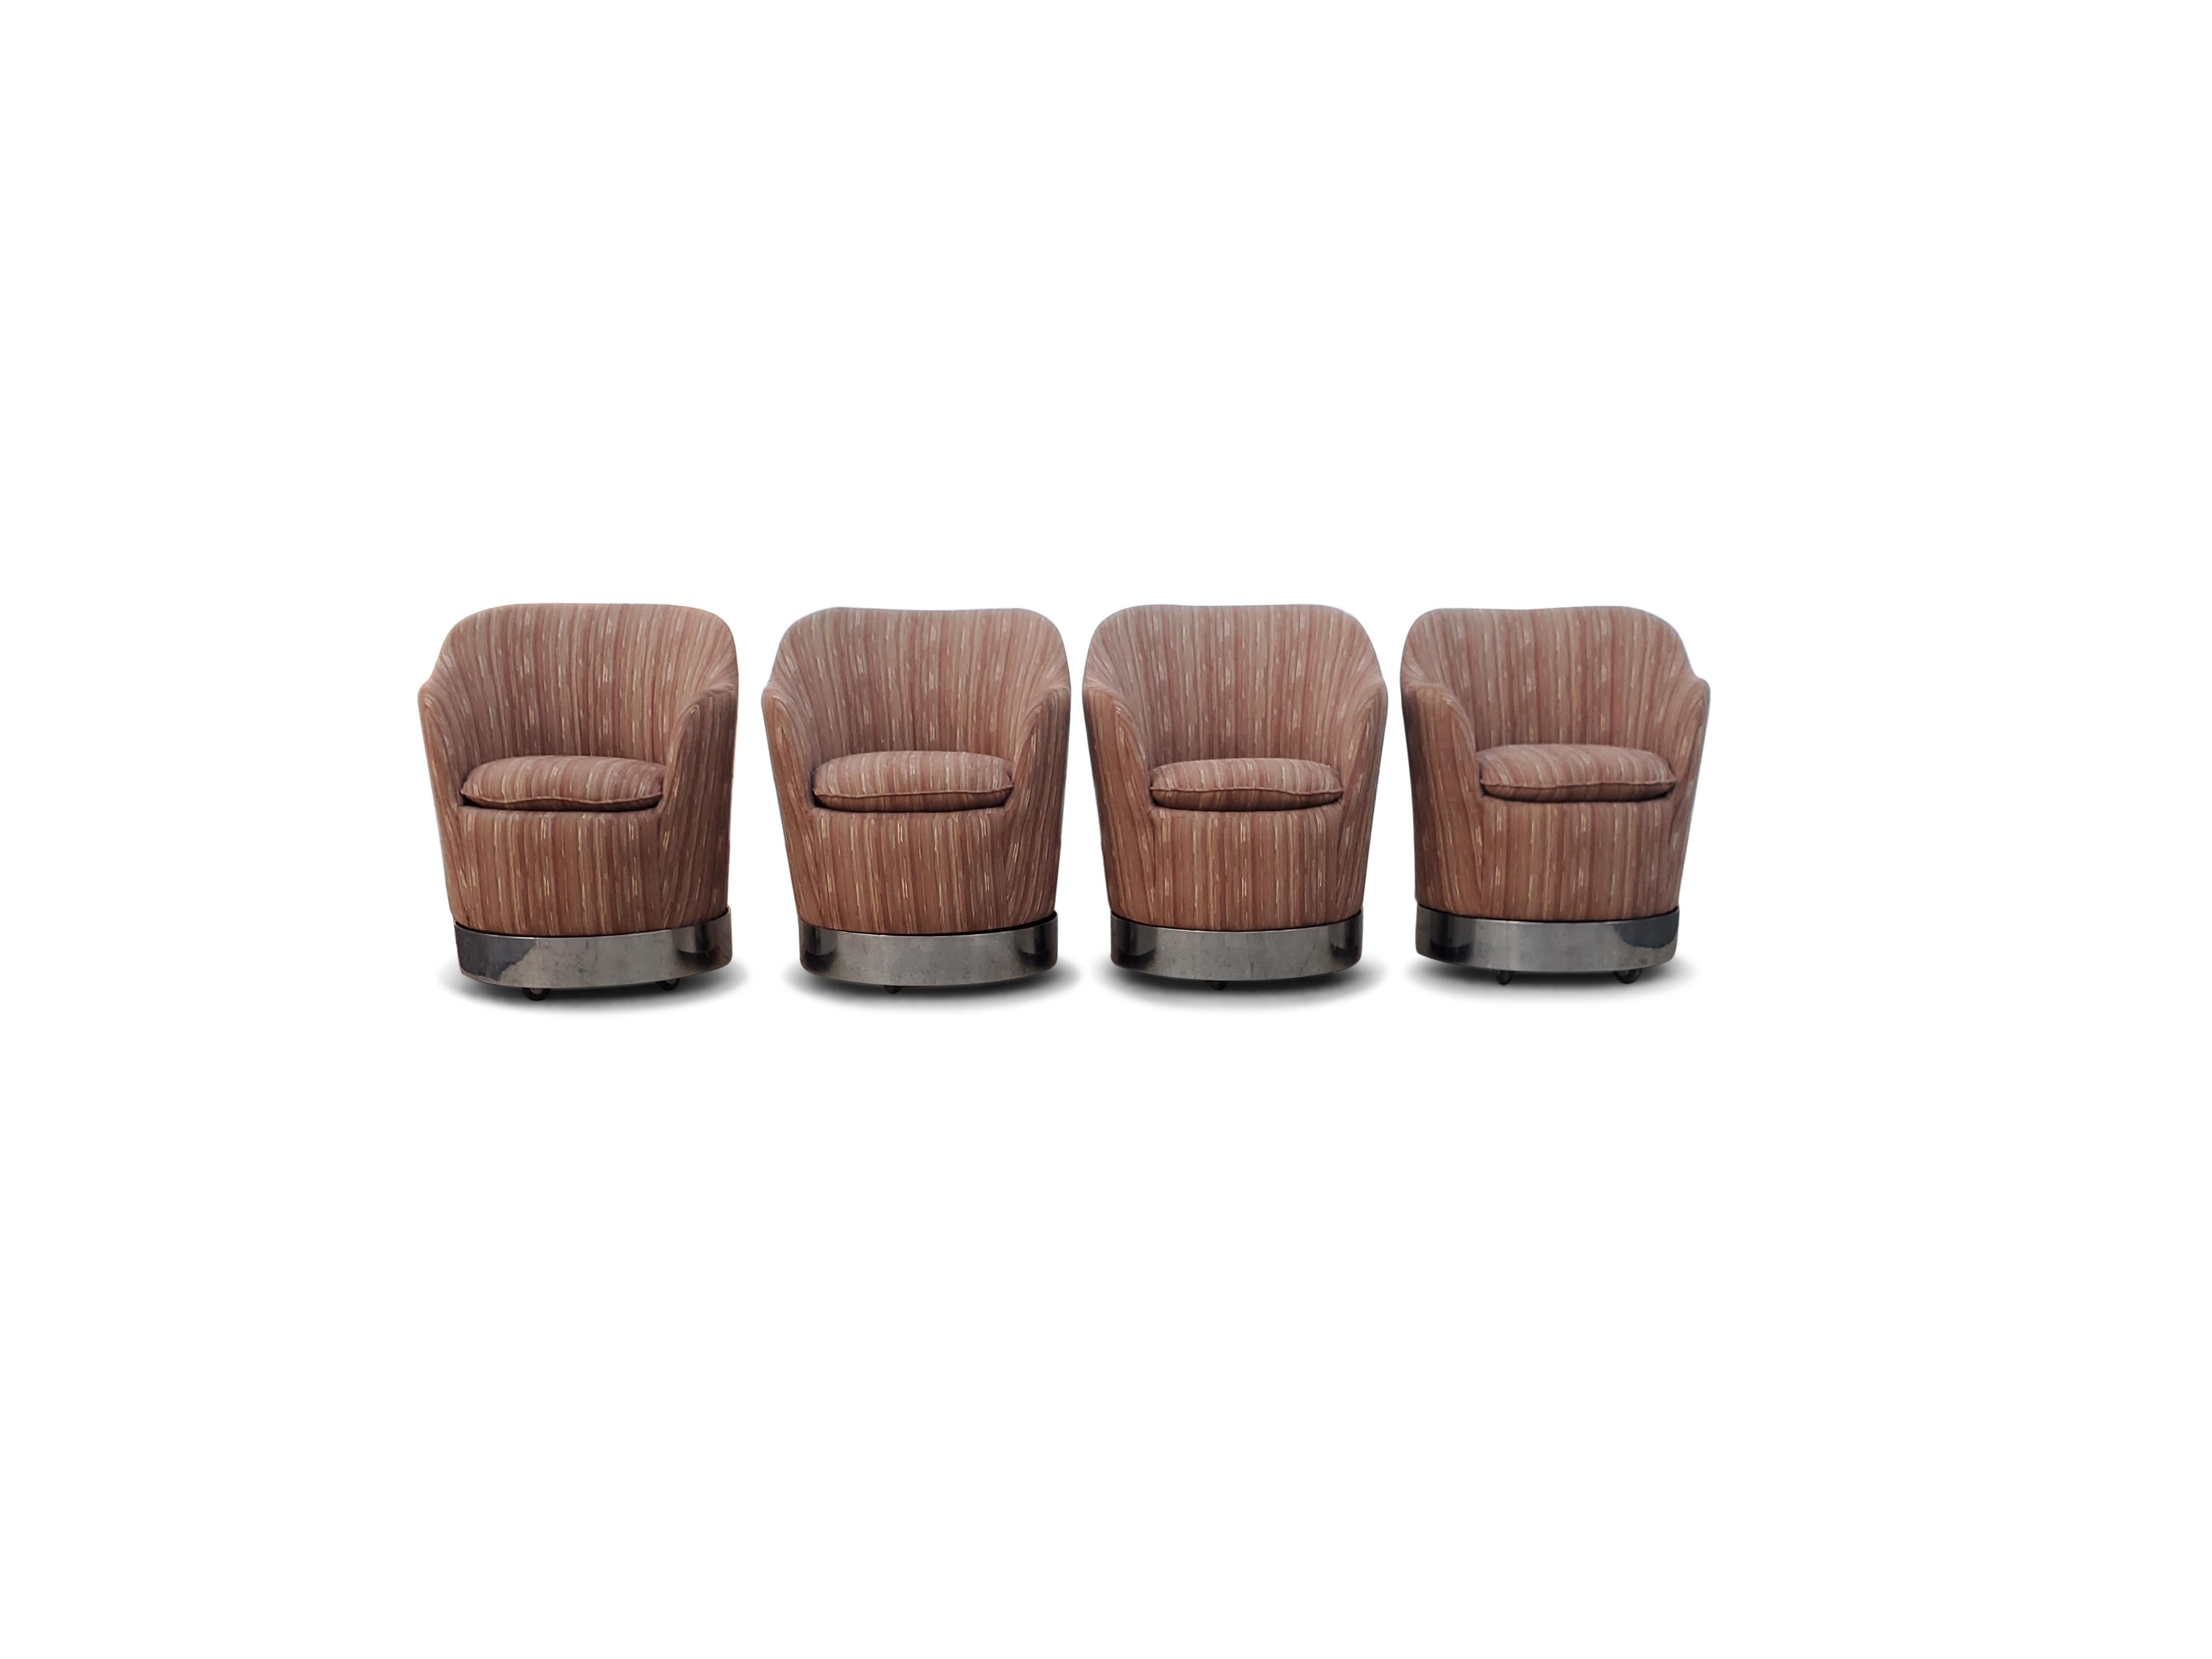 Set of four Philip Enfield swivel chairs 

Chairs swivel, rock, and roll smooth on castors. Chairs are signed.